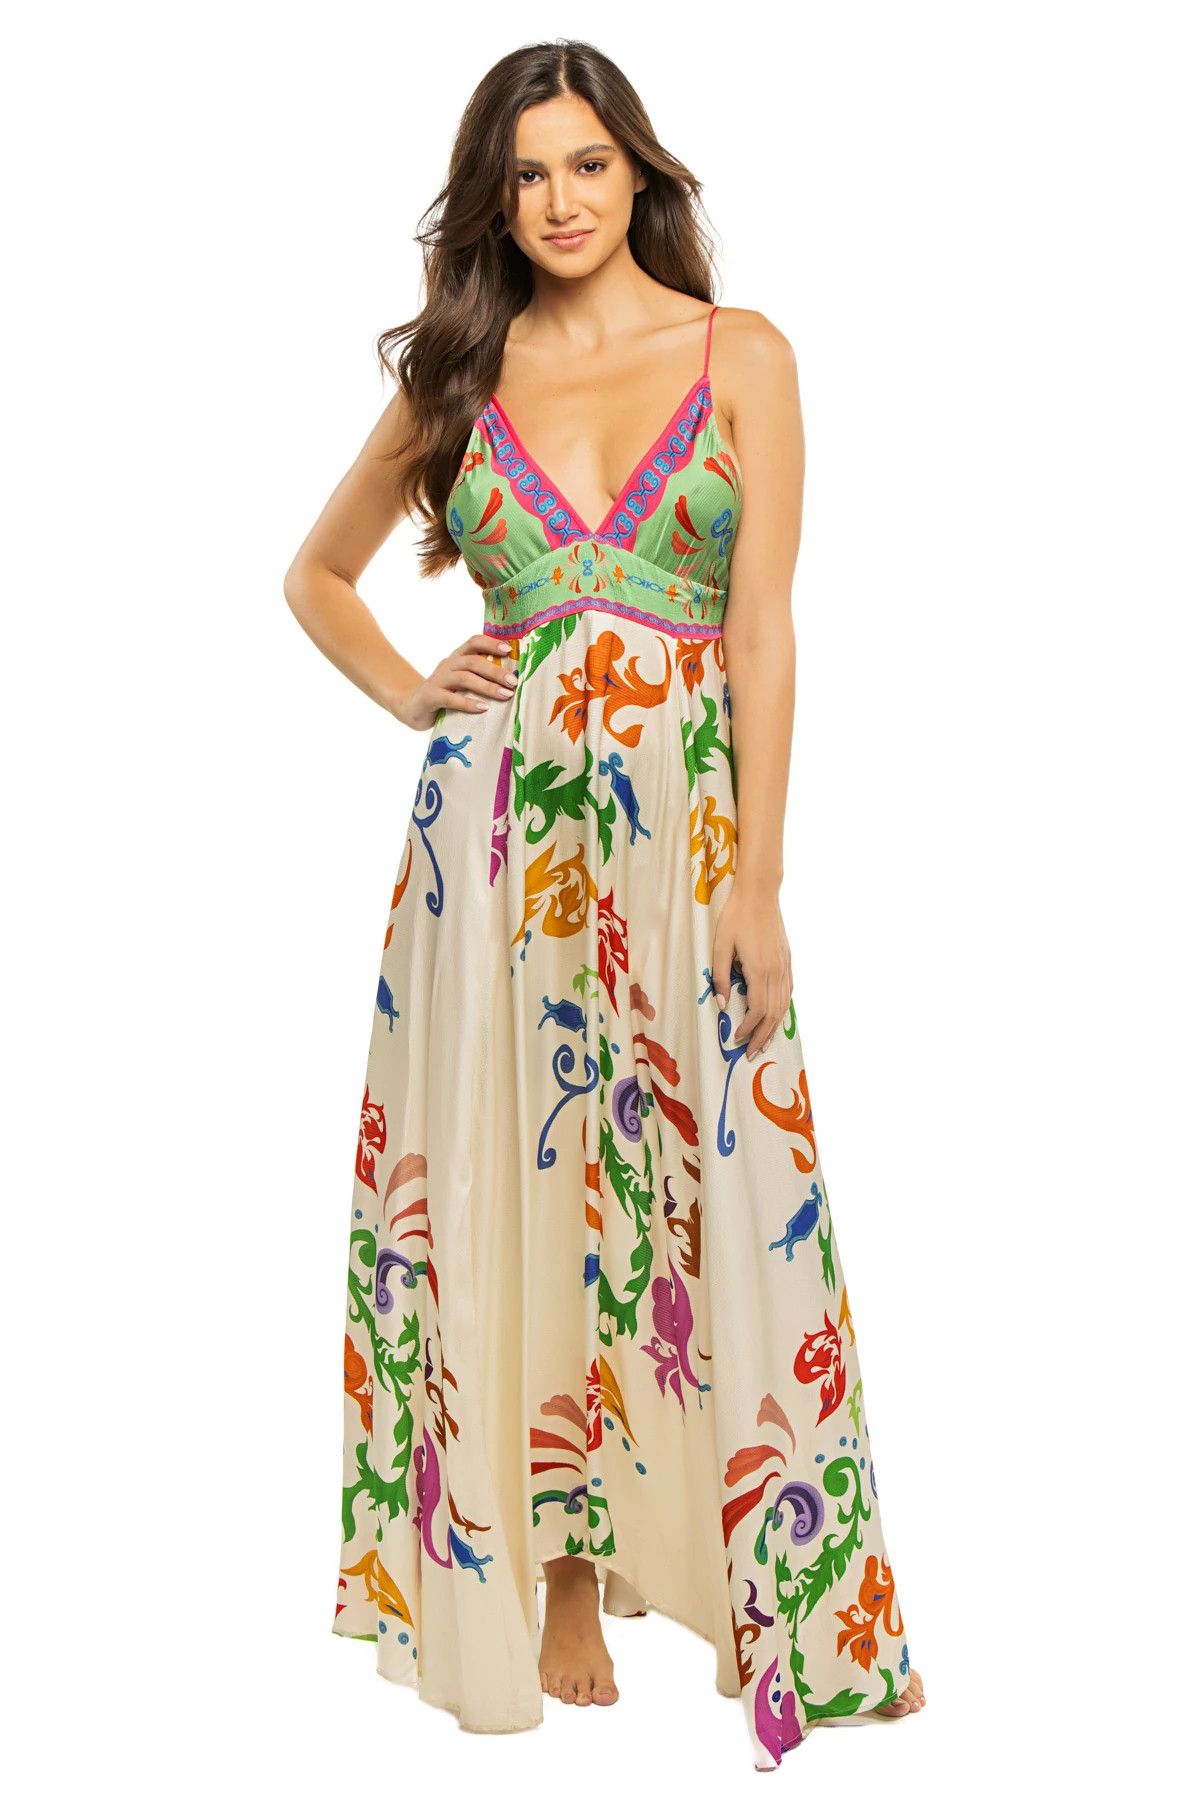 Star V-Neck Maxi Dress | Everything But Water